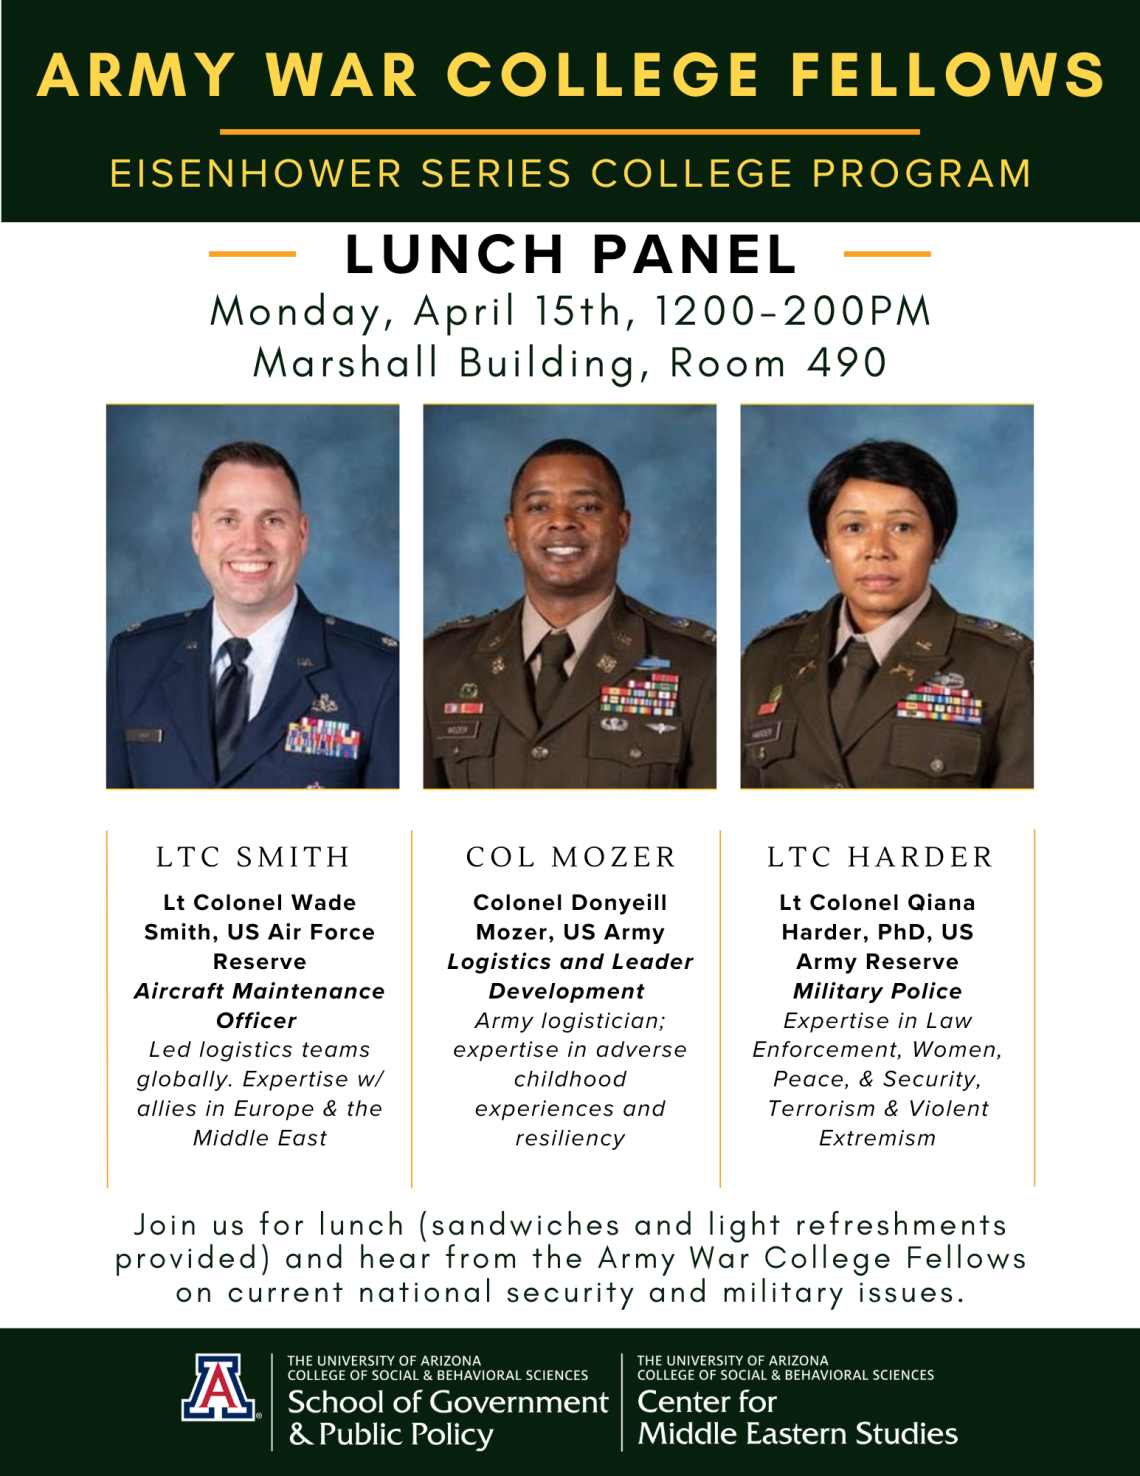 Army War College Fellows Lunch Panel, Event Flyer, Monday April 15th, 12-2PM, Marshall building Room 490